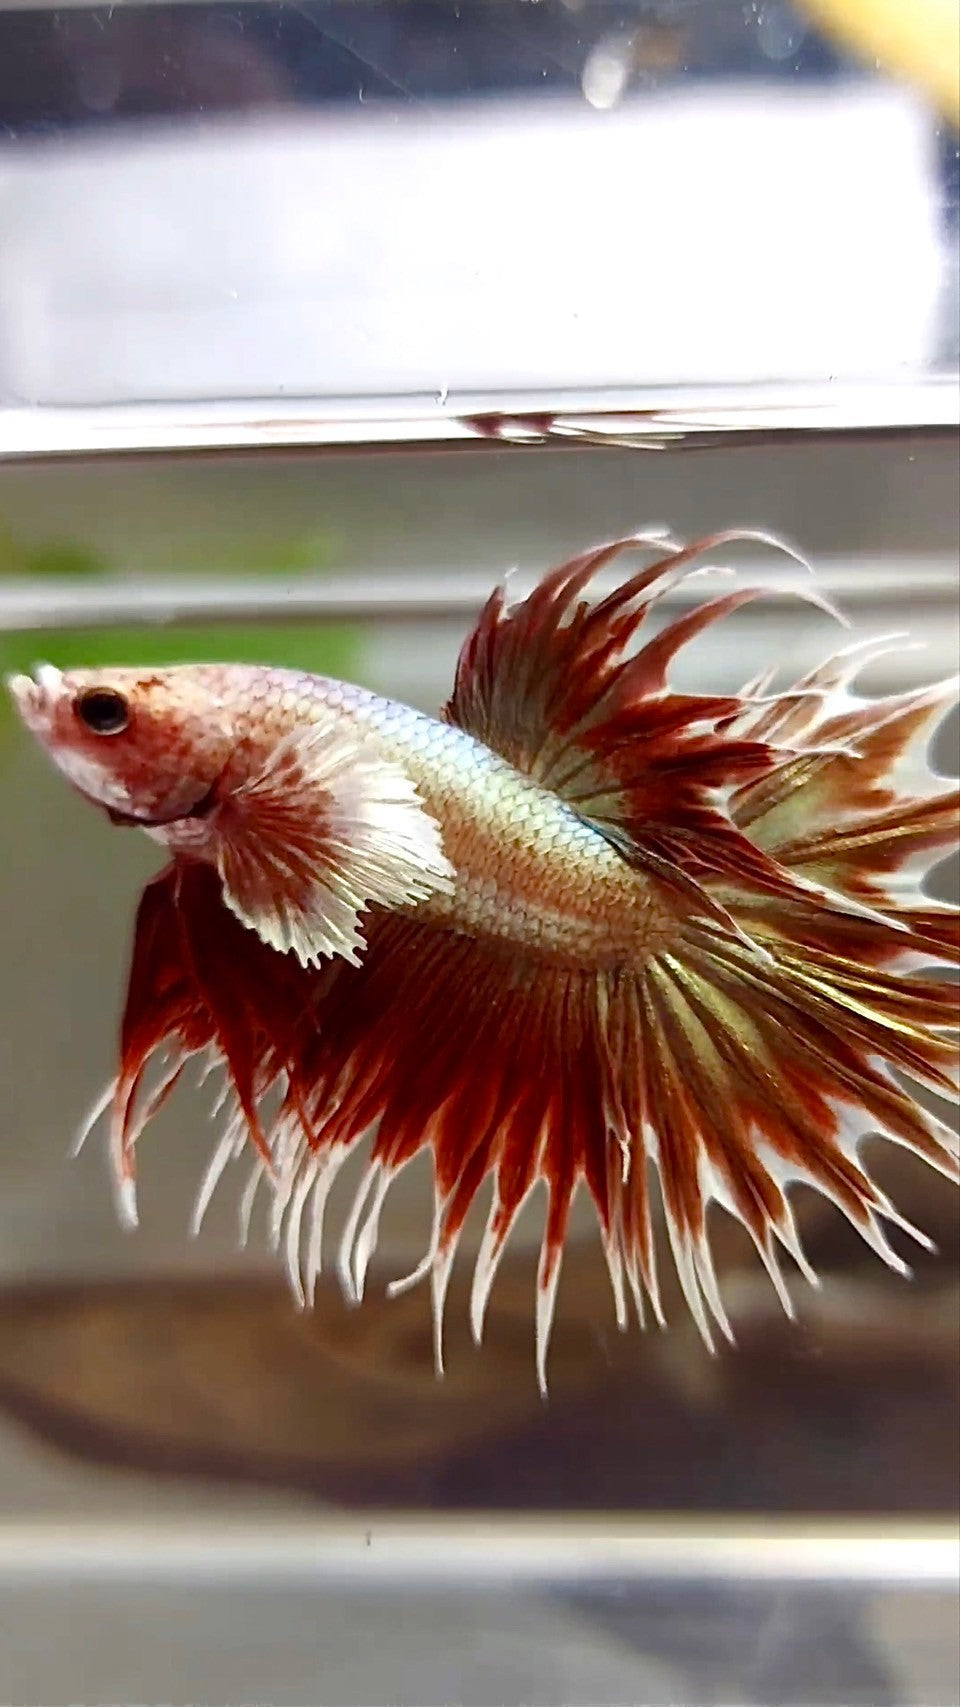 CROWNTAIL DUMBO EAR ROSEGOLD SUPER BETTA FISH